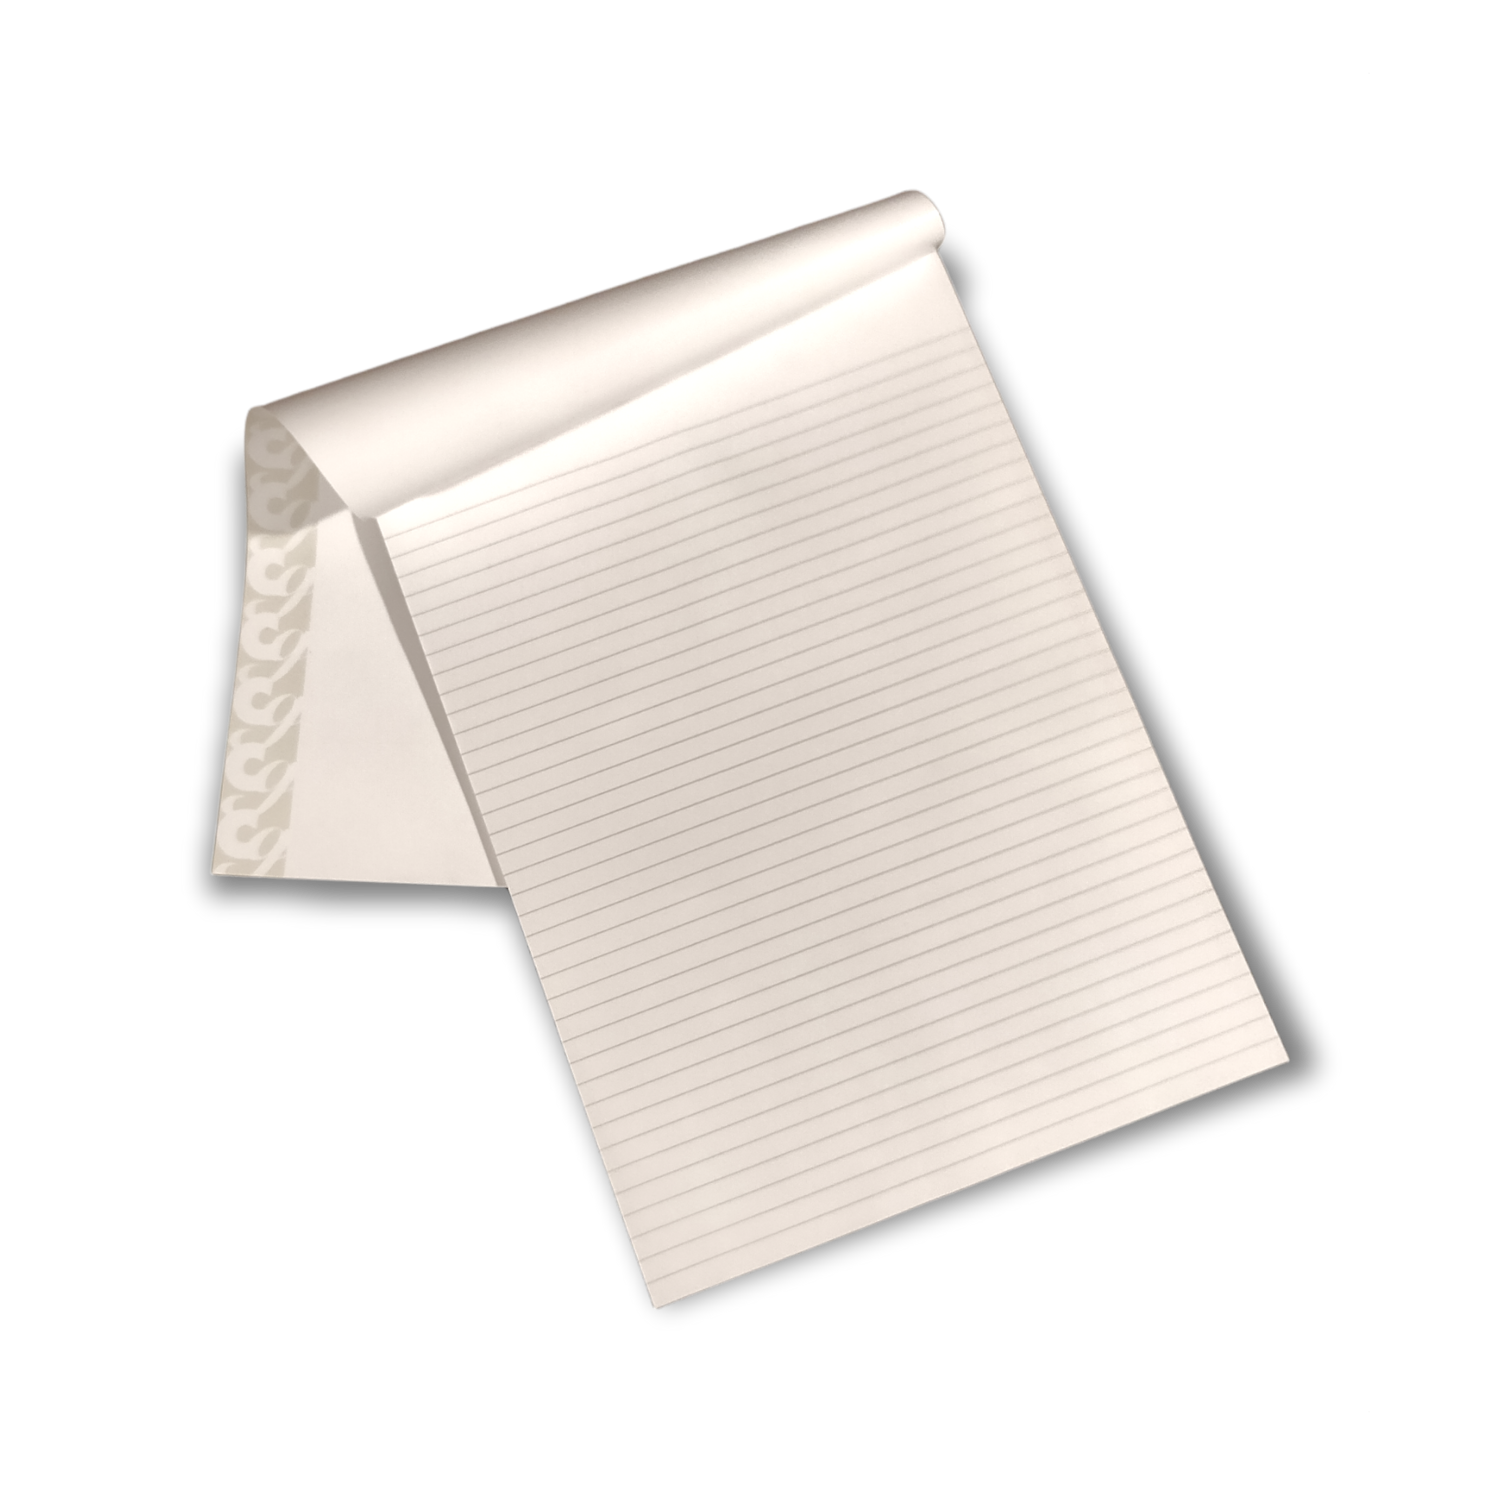 5x A4 Notepad - Basic Lined White